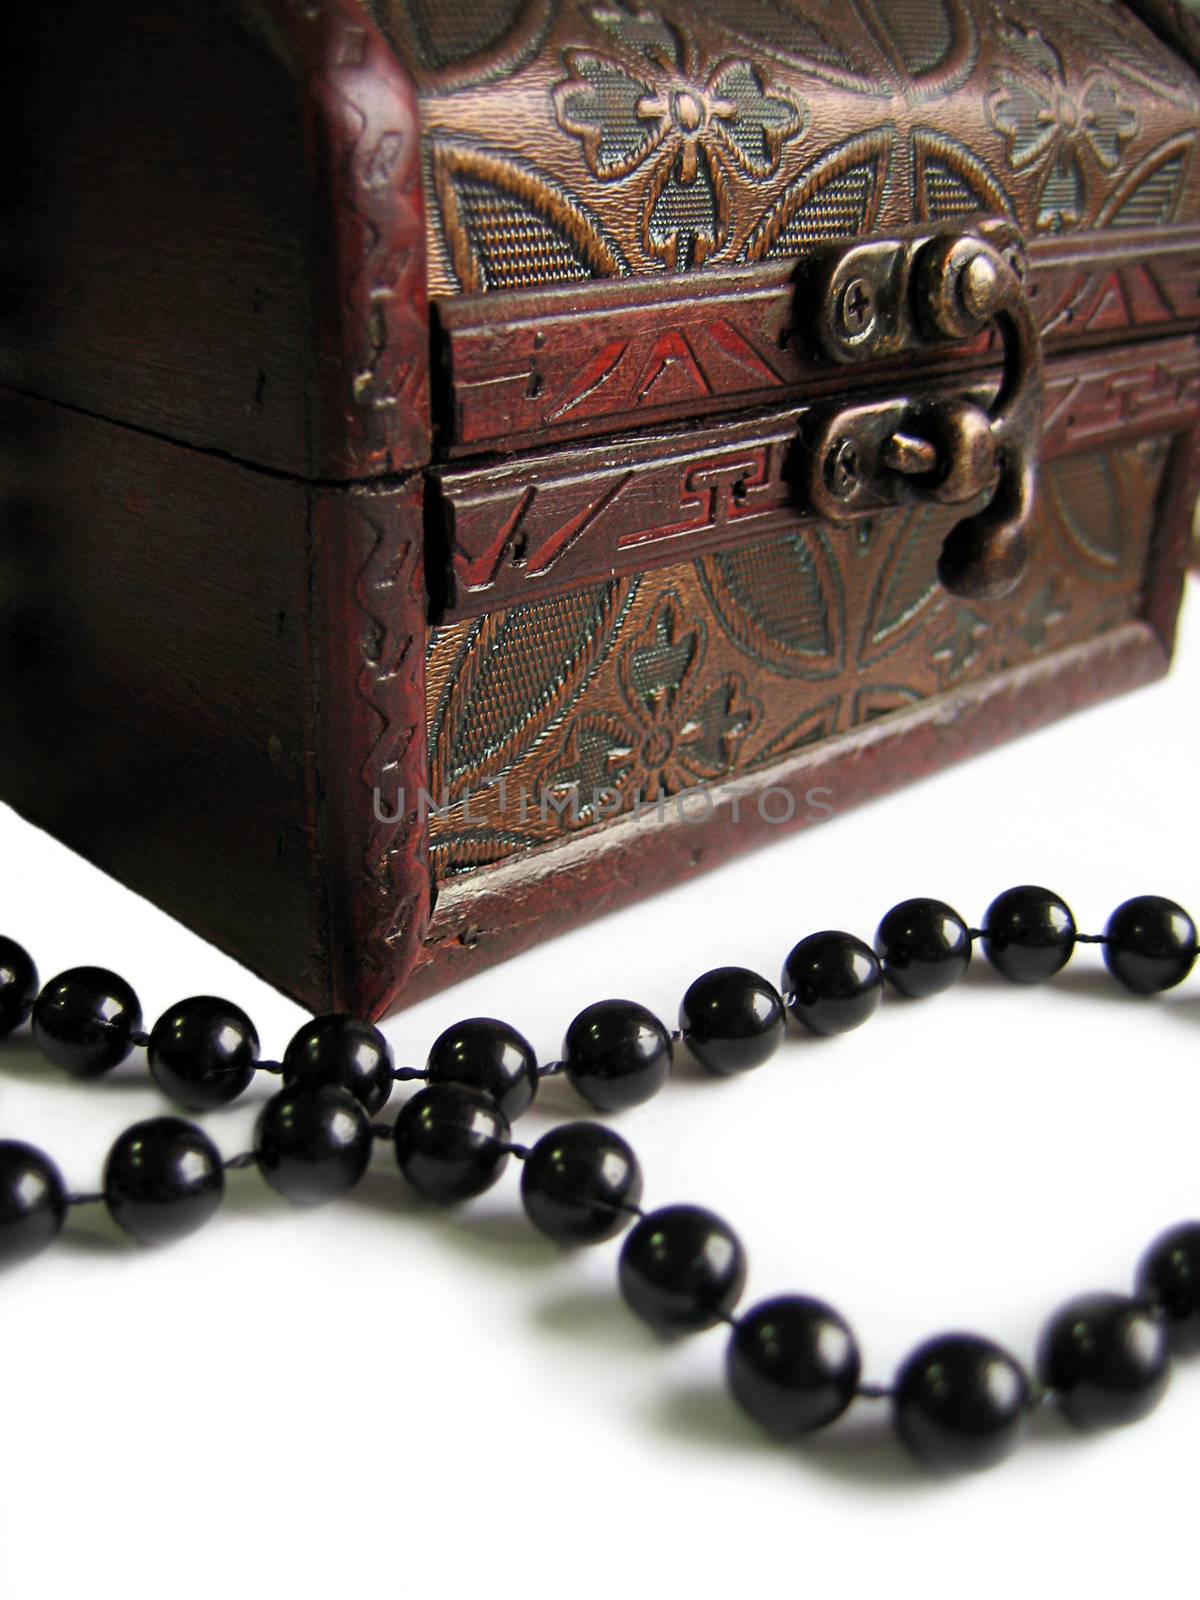 Old-fashioned ornate chest box with black pearls